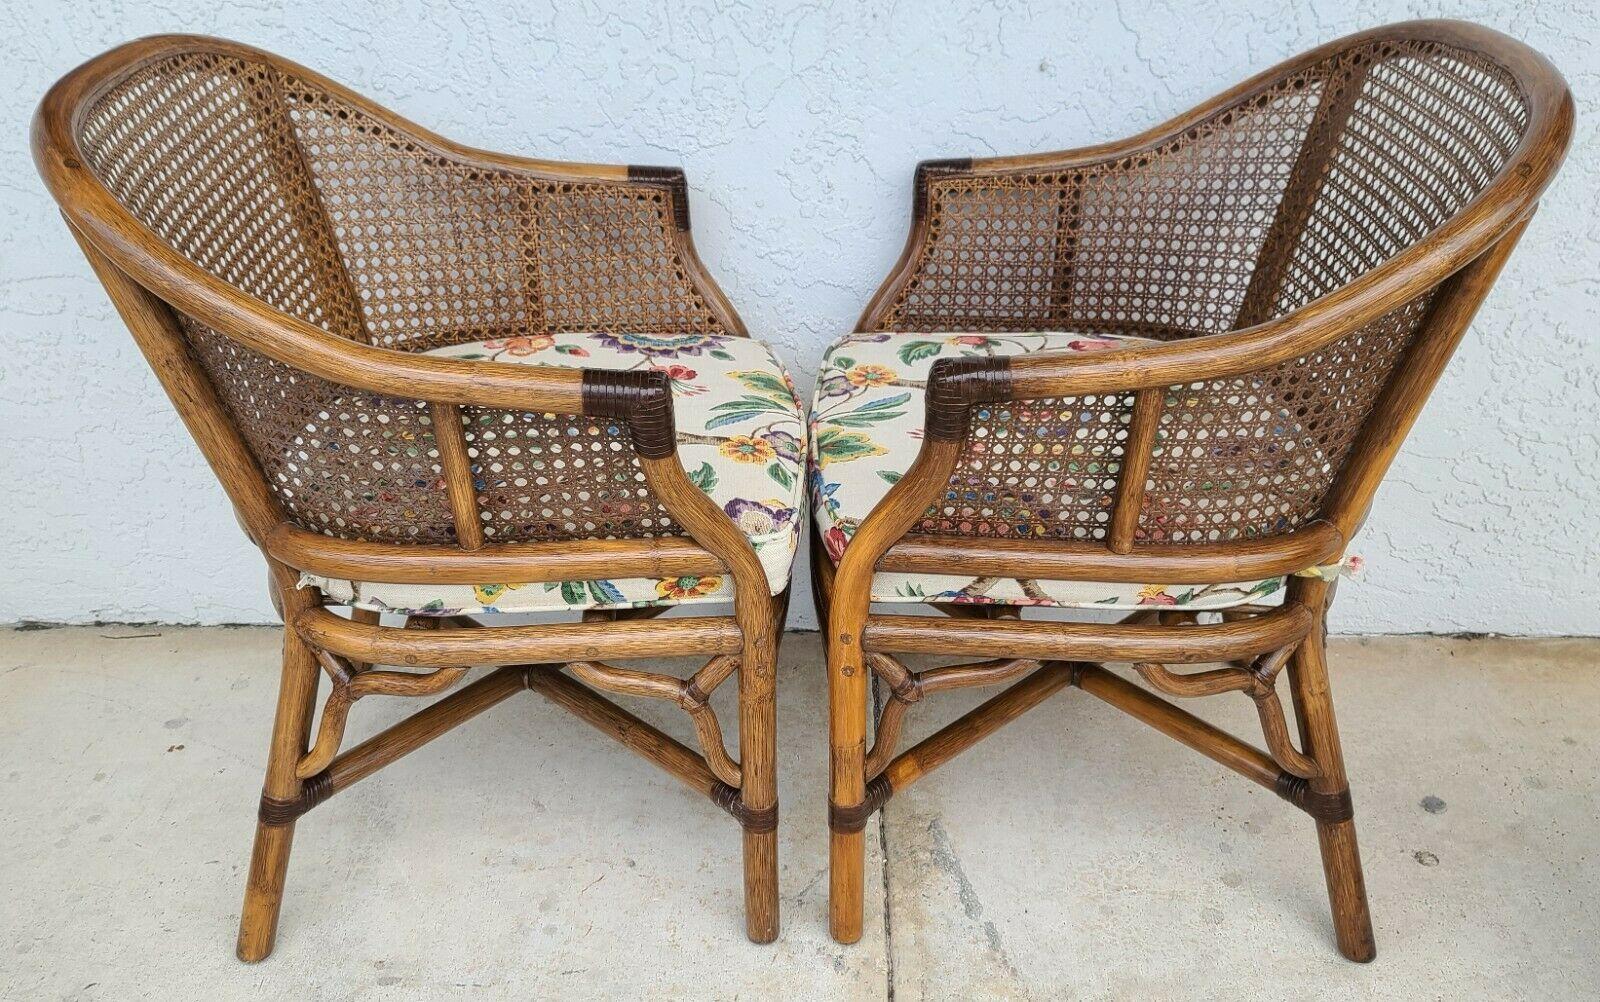 Bamboo Rattan Cane Dining Chairs by Whitecraft Rattan, Set of 4 3